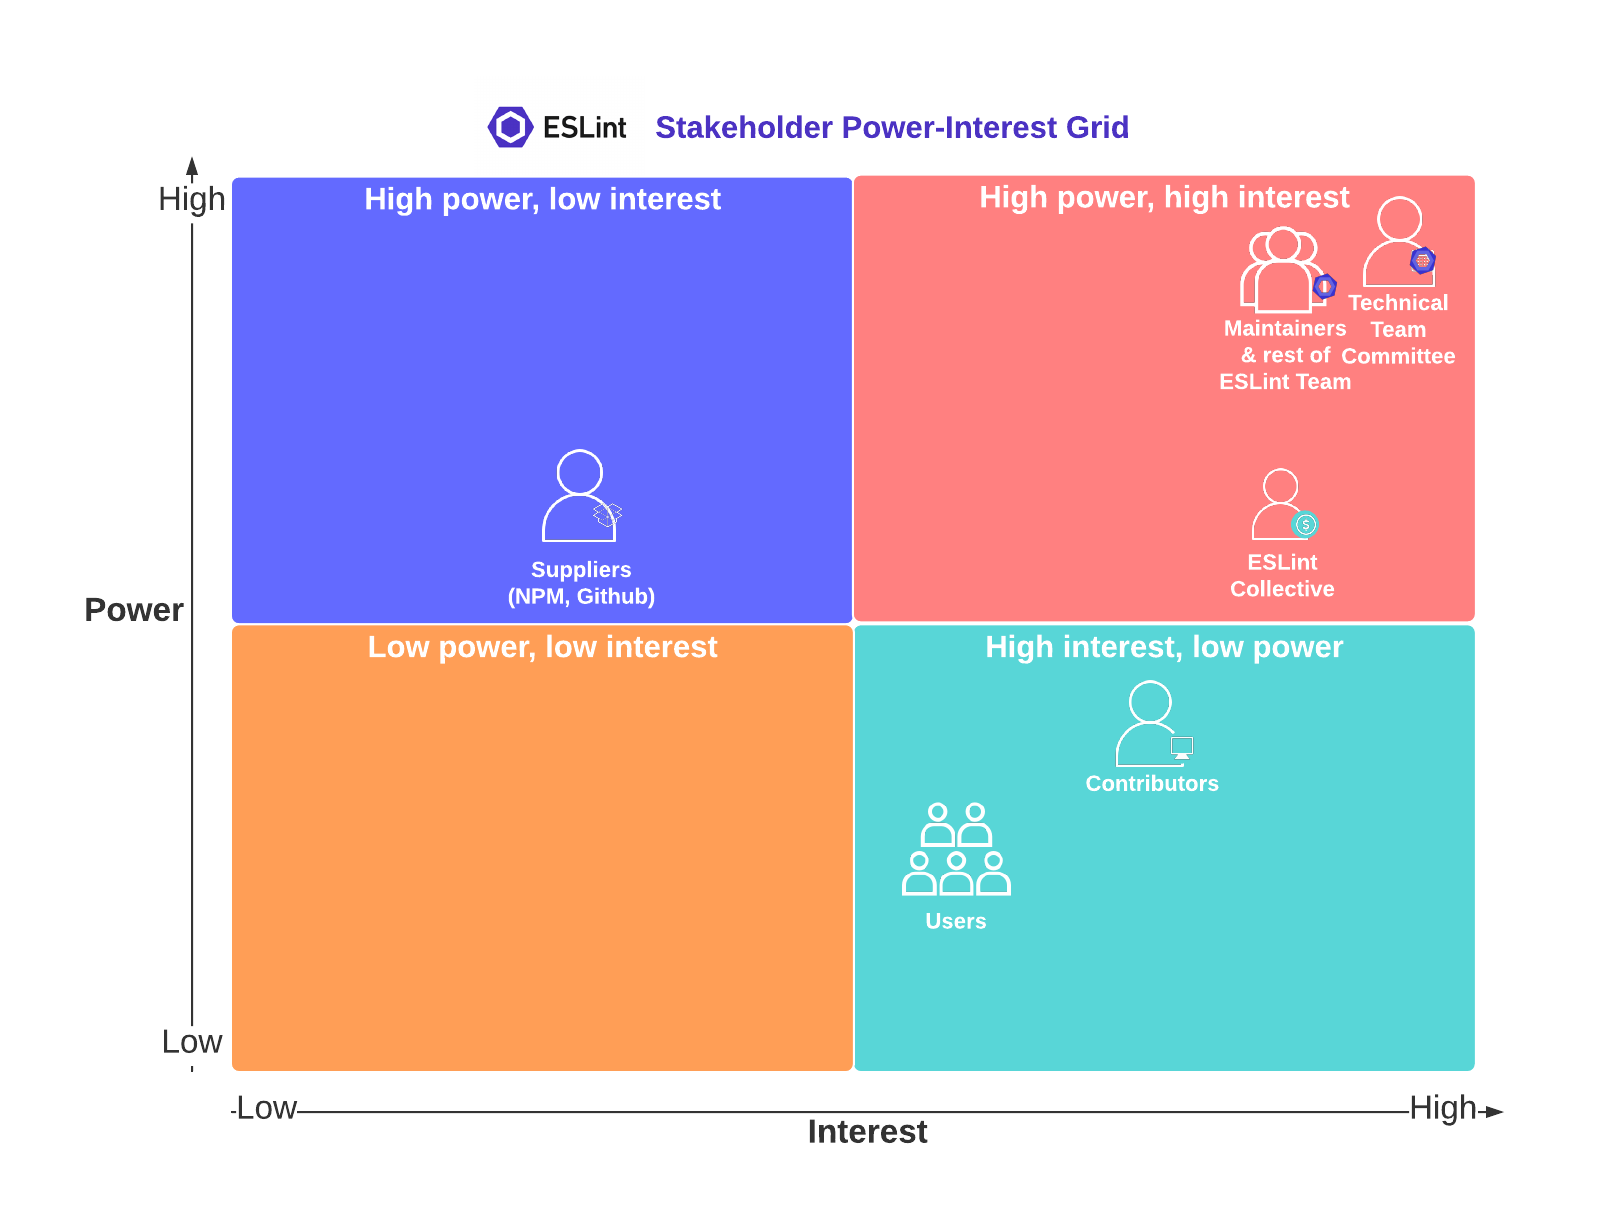 The power-interest grid of the stakeholders.